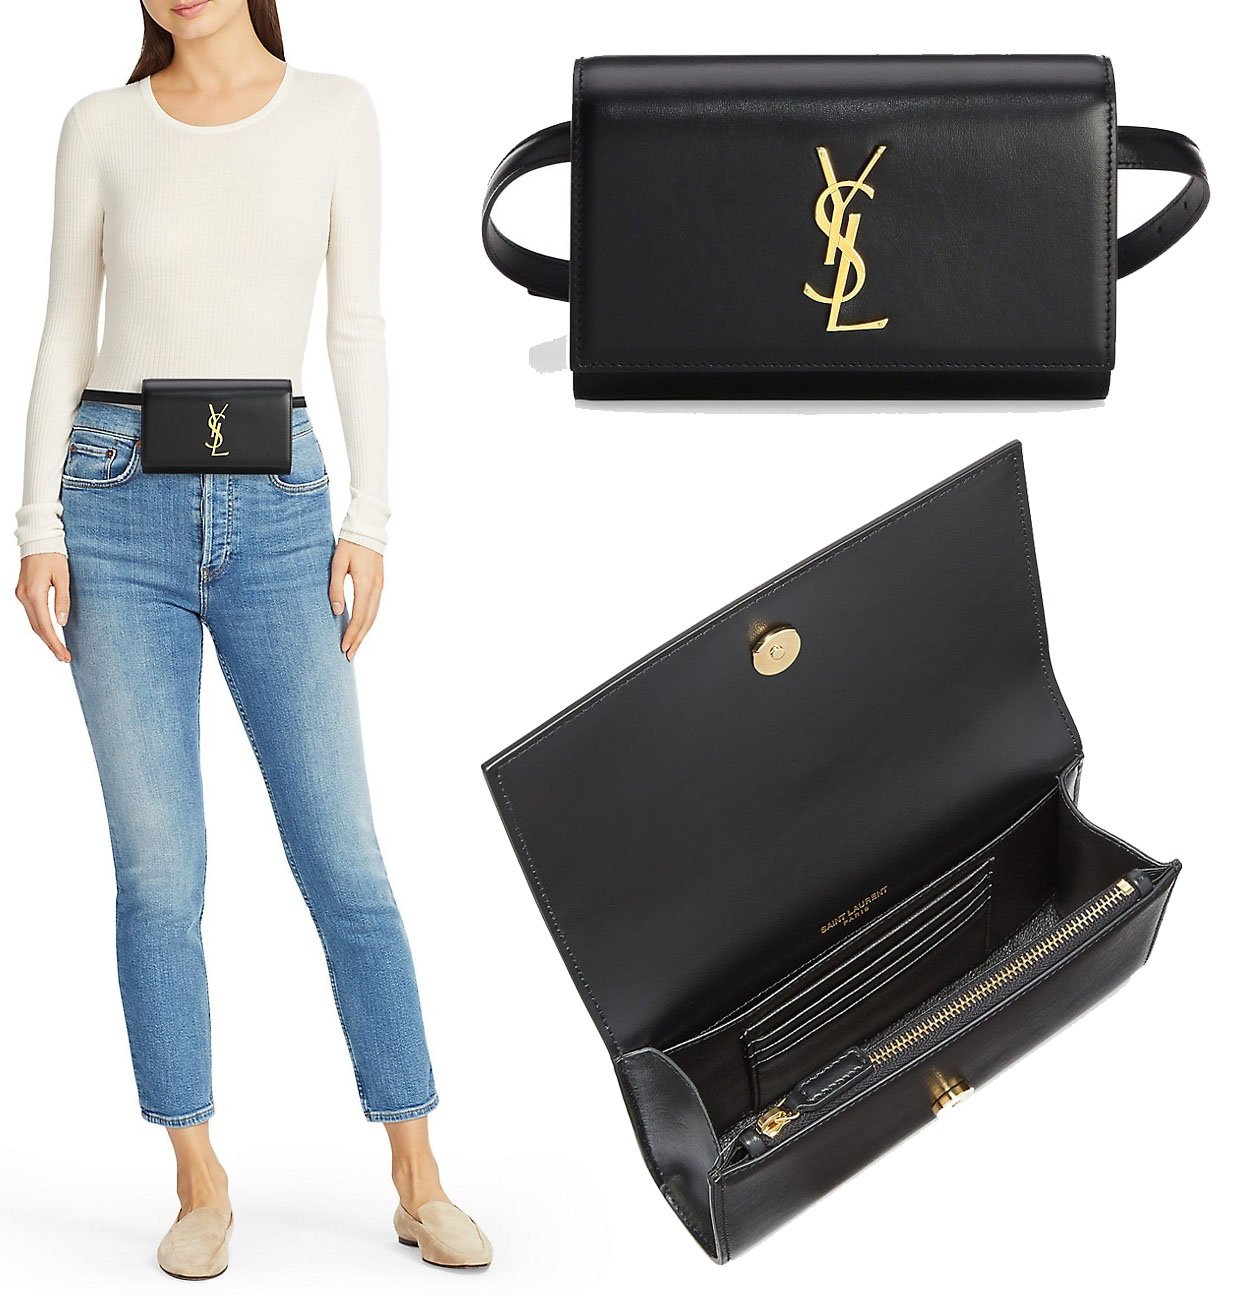 A classy, minimalist belt bag made of smooth leather with gold-tone YSL logo on the foldover flap